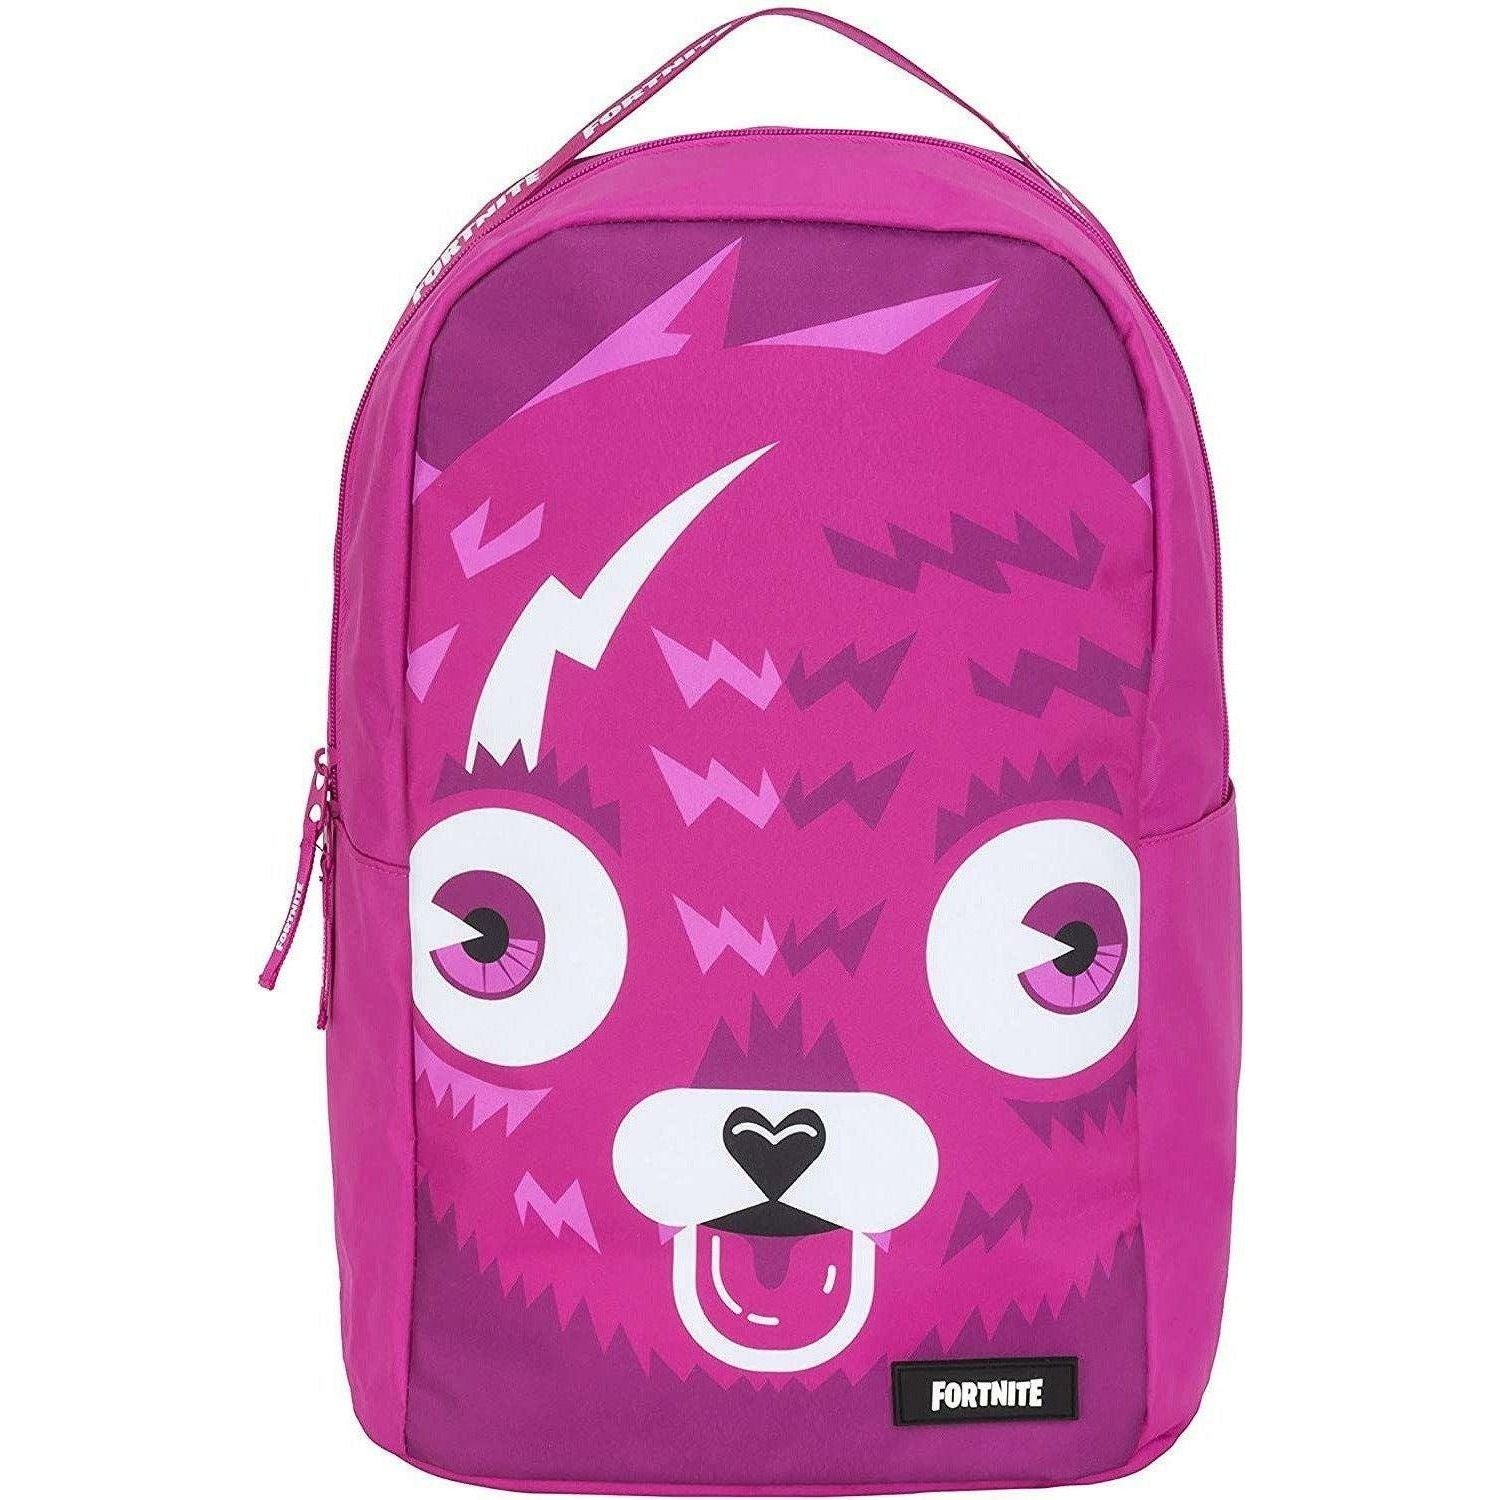 Fortnite Official Profile Backpack Pink - BumbleToys - 6+ Years, Backpack, Bags, Characters, Disney, Girls, School Supplies